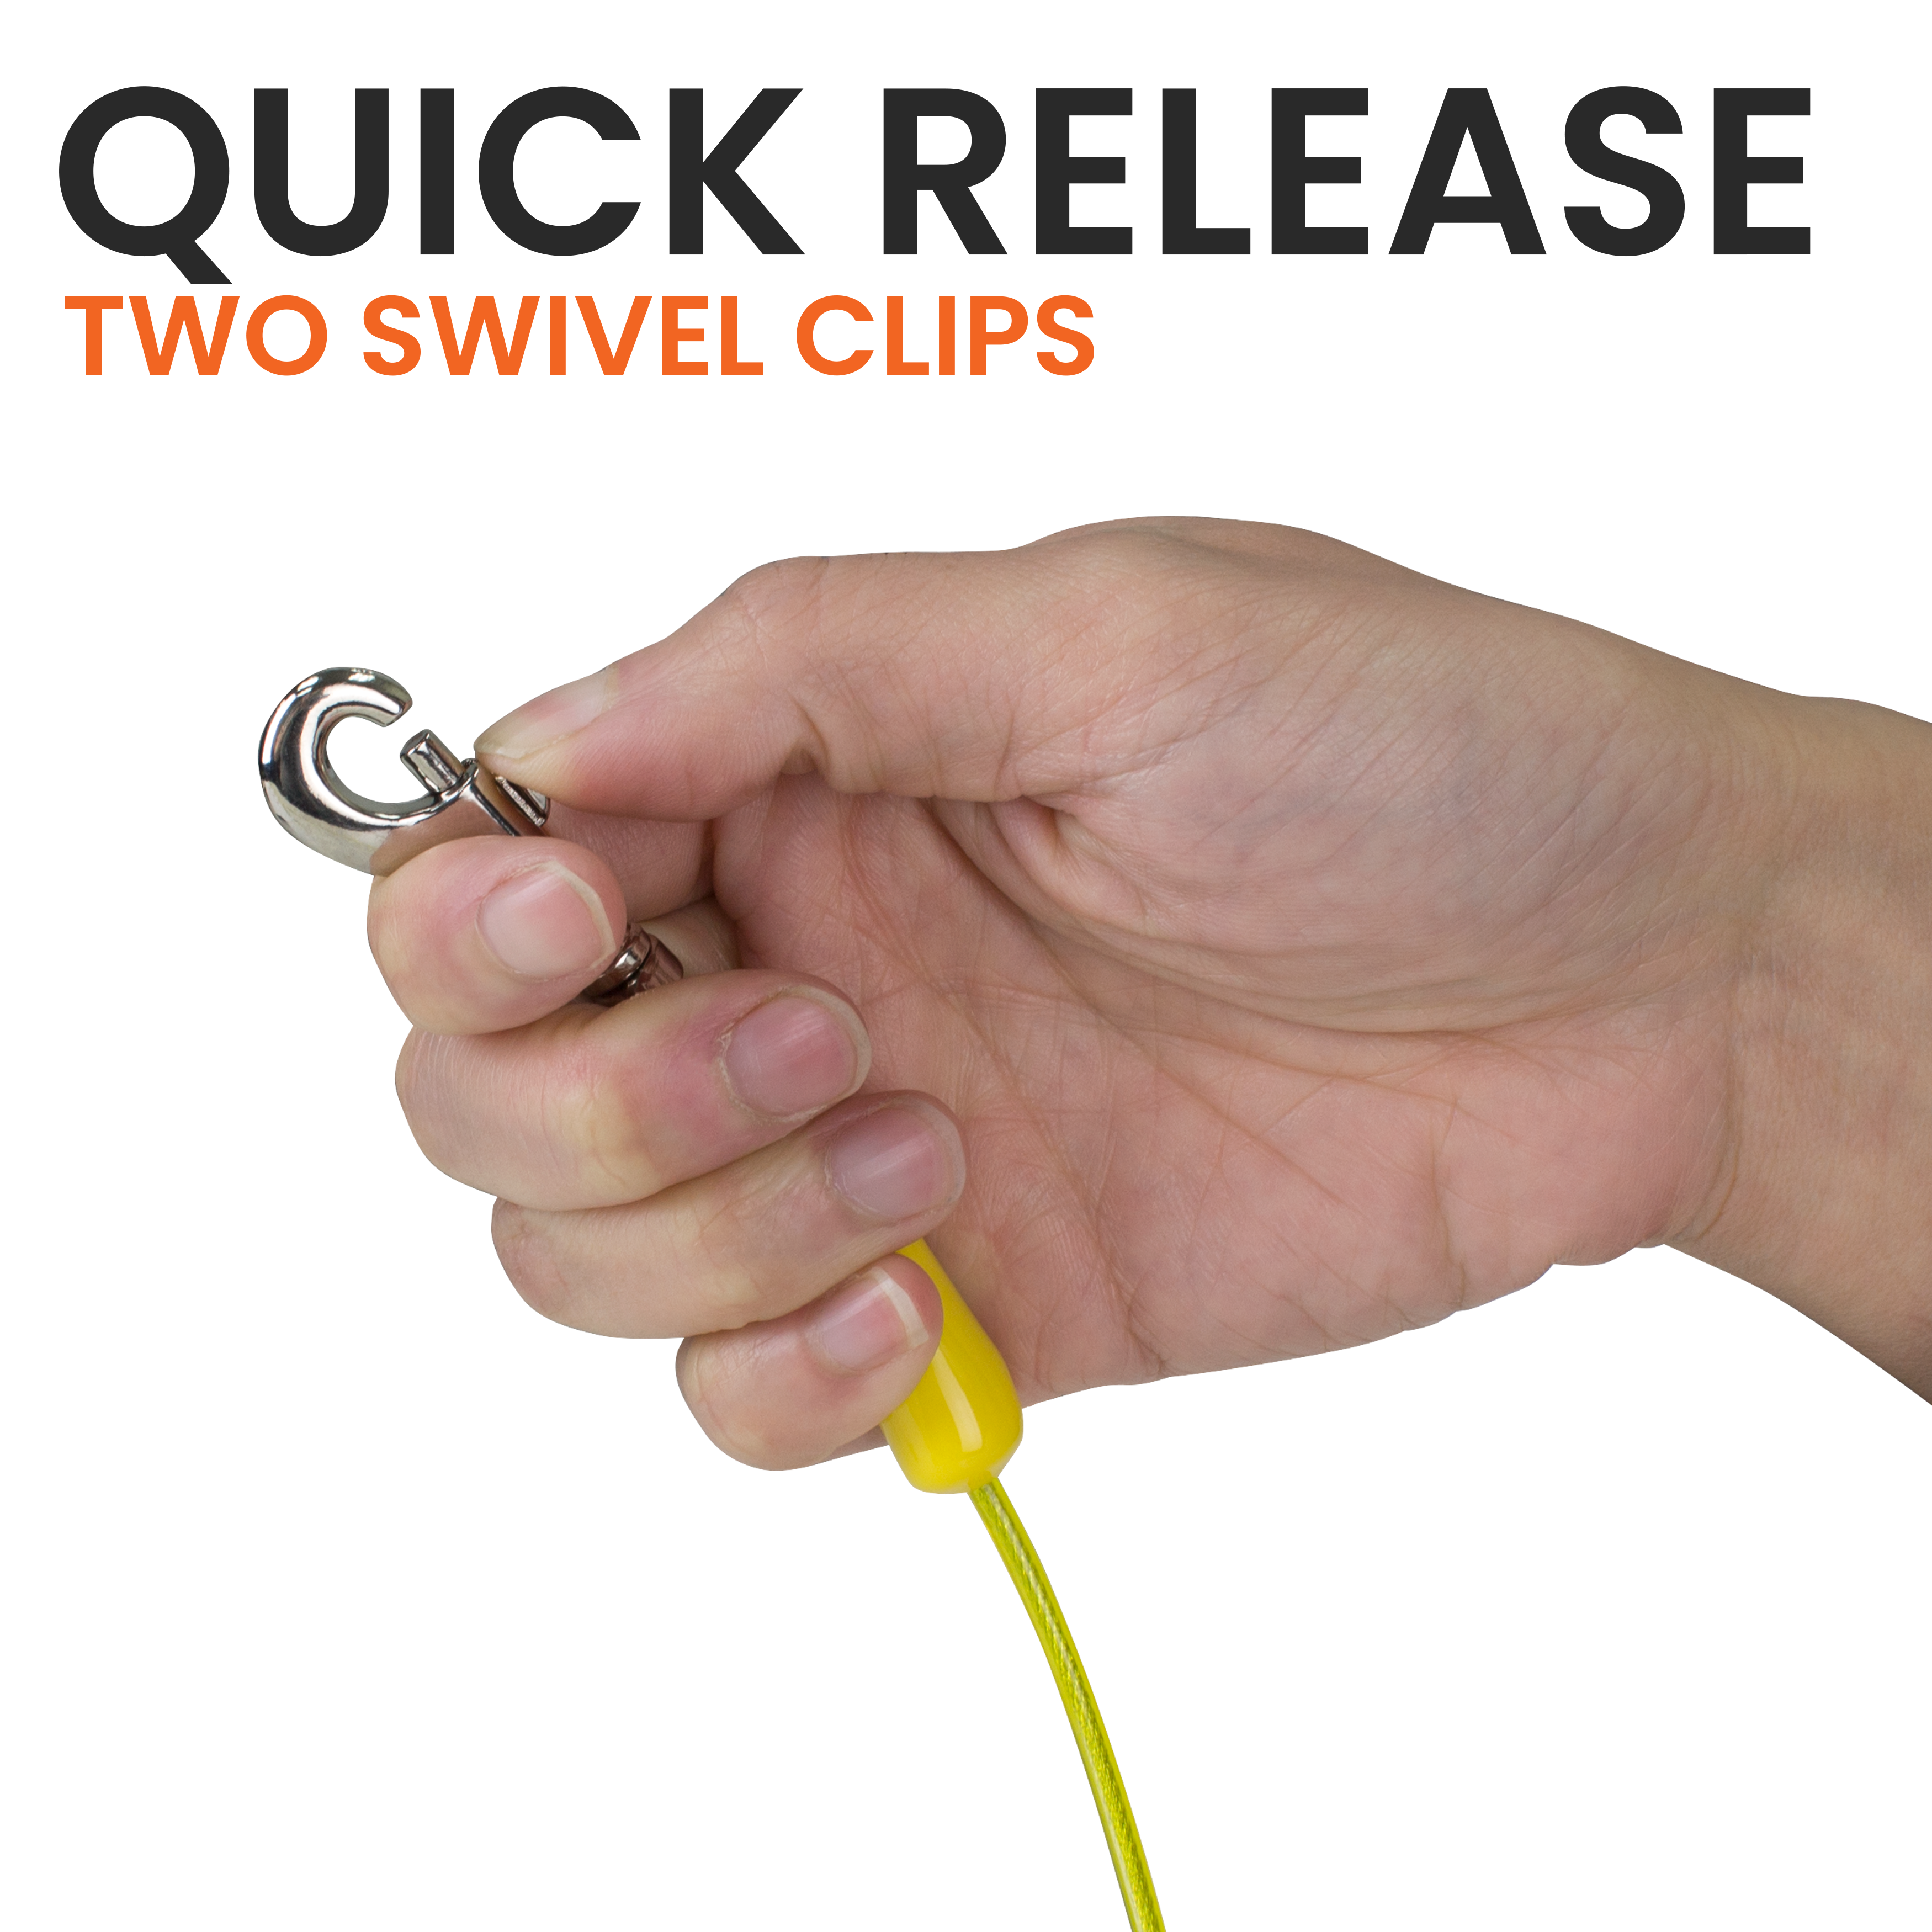 Quick Release Feature for Cable Swivel Clips